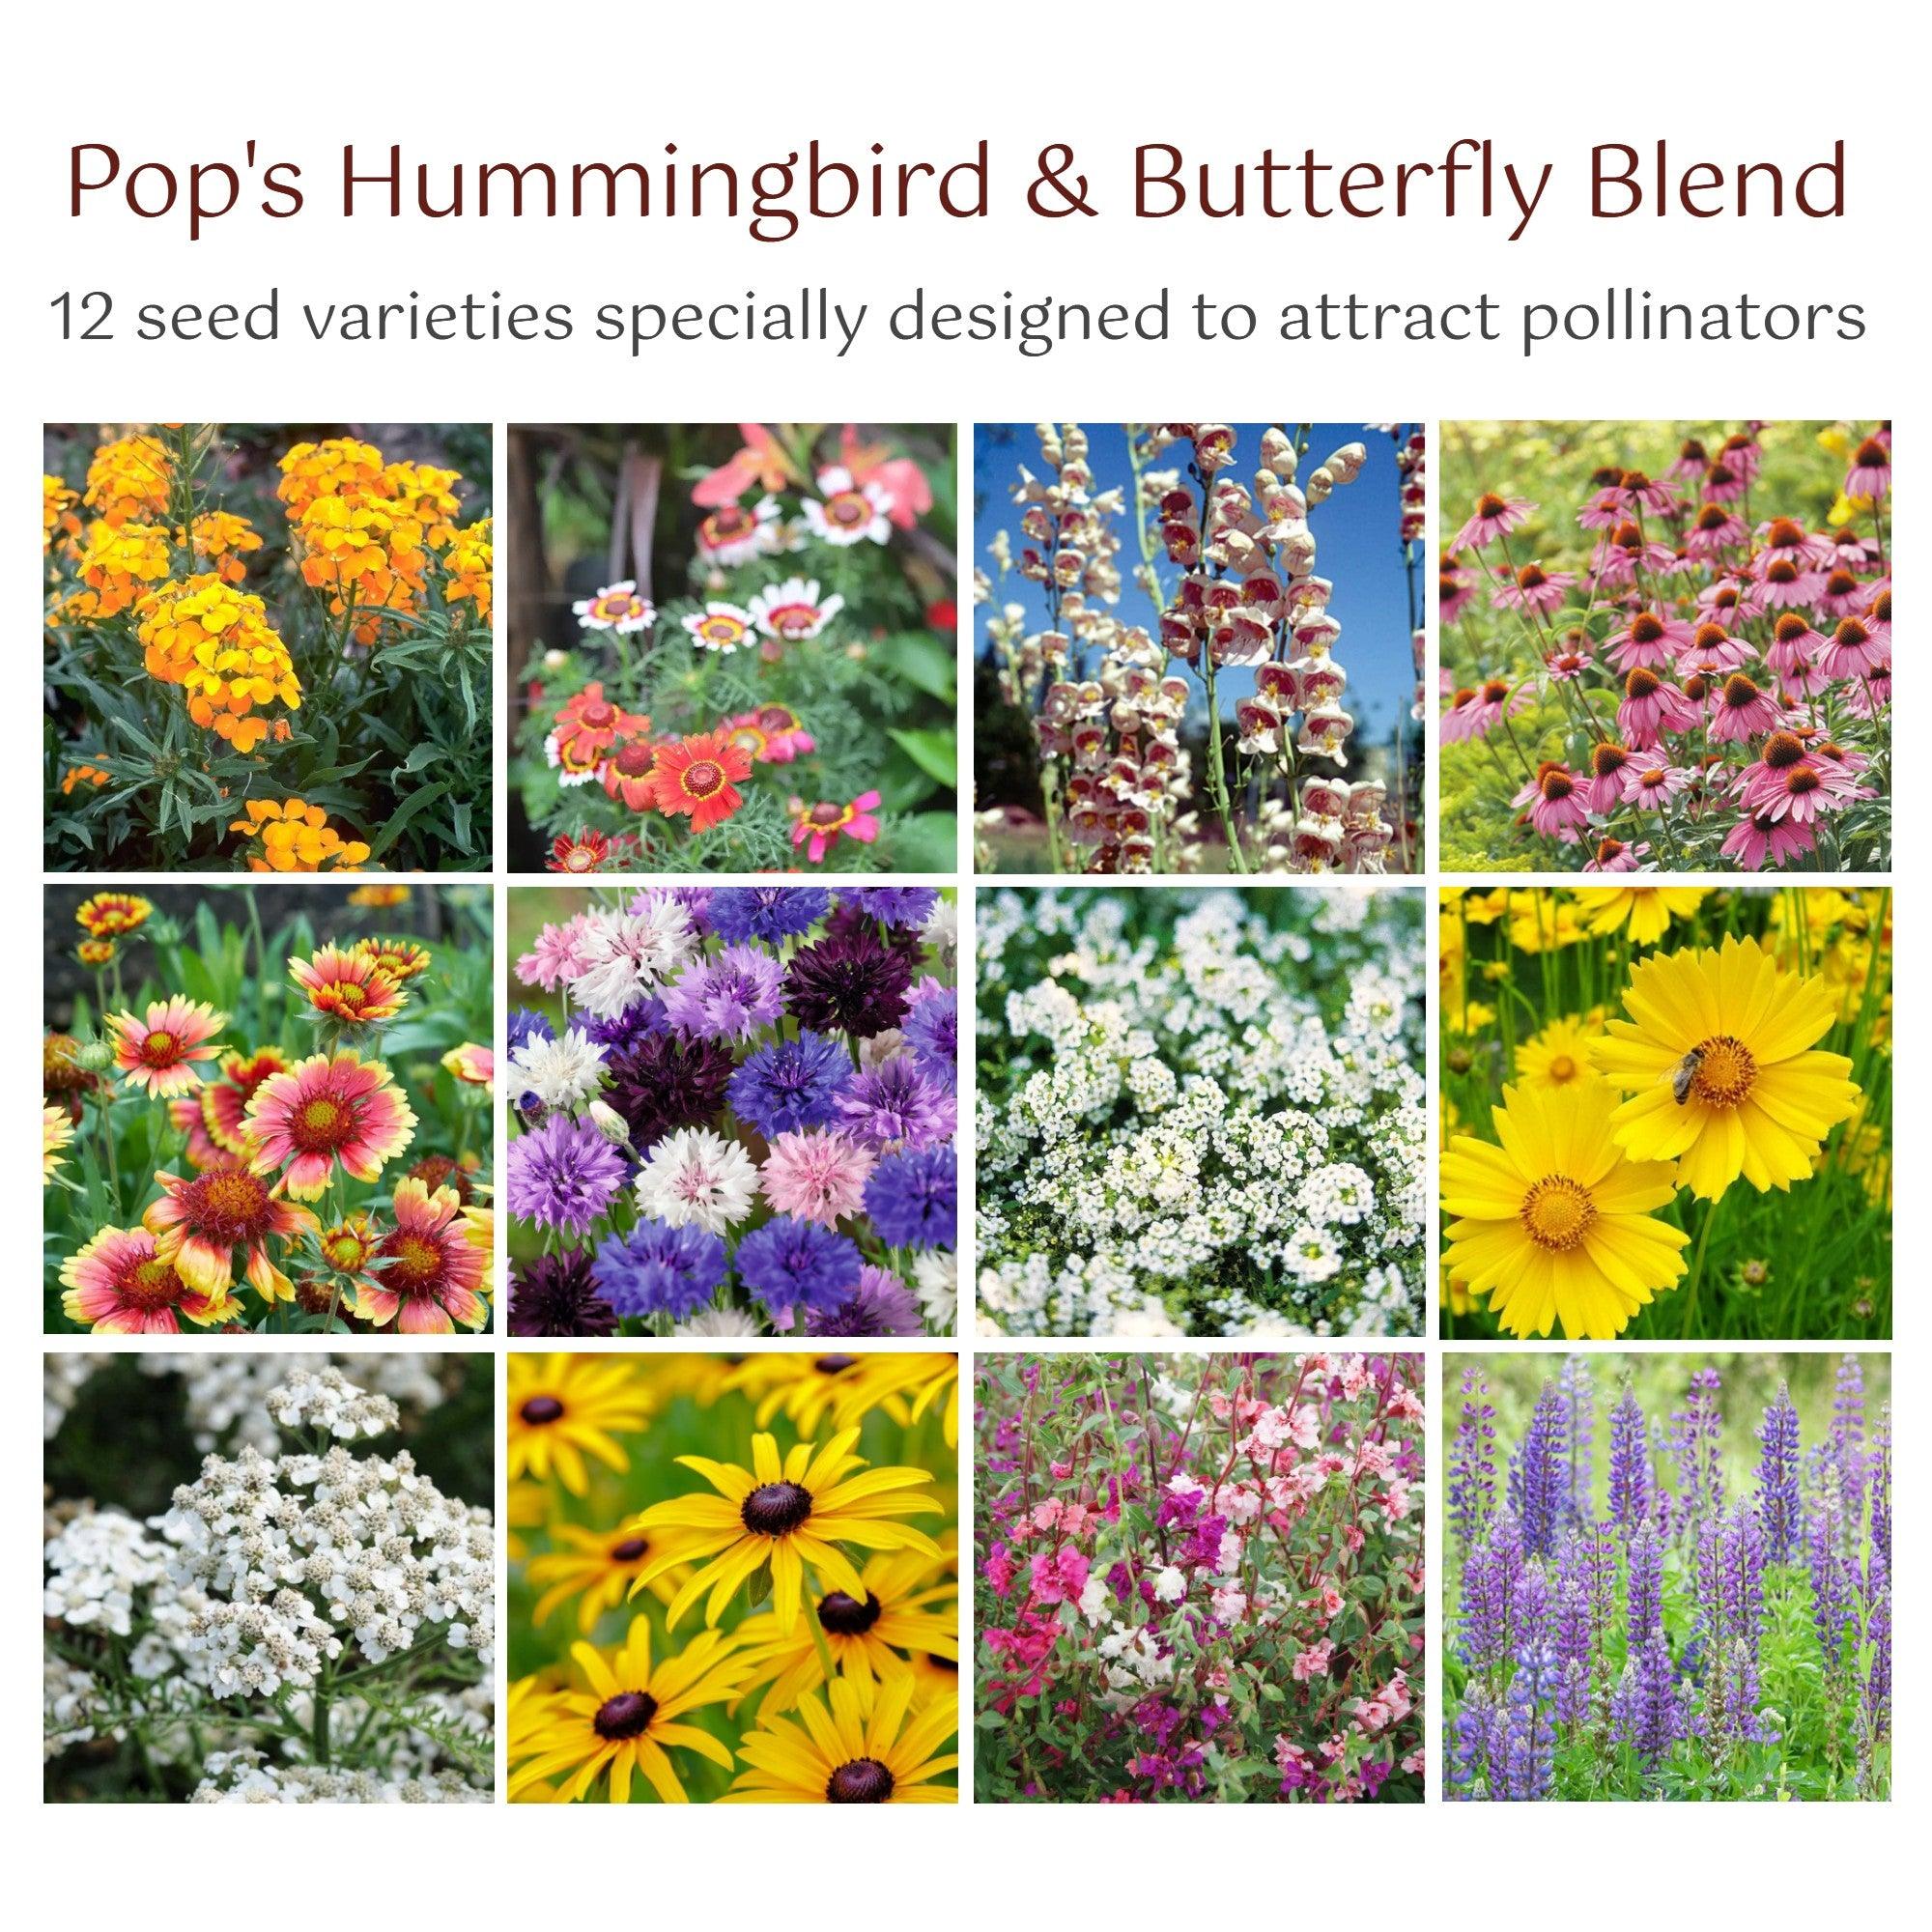 23 Hummingbird Butterfly Wildflower Seeds Mix for Planting Indoor &  Outdoors. 100,000+ Non-GMO, Heirloom